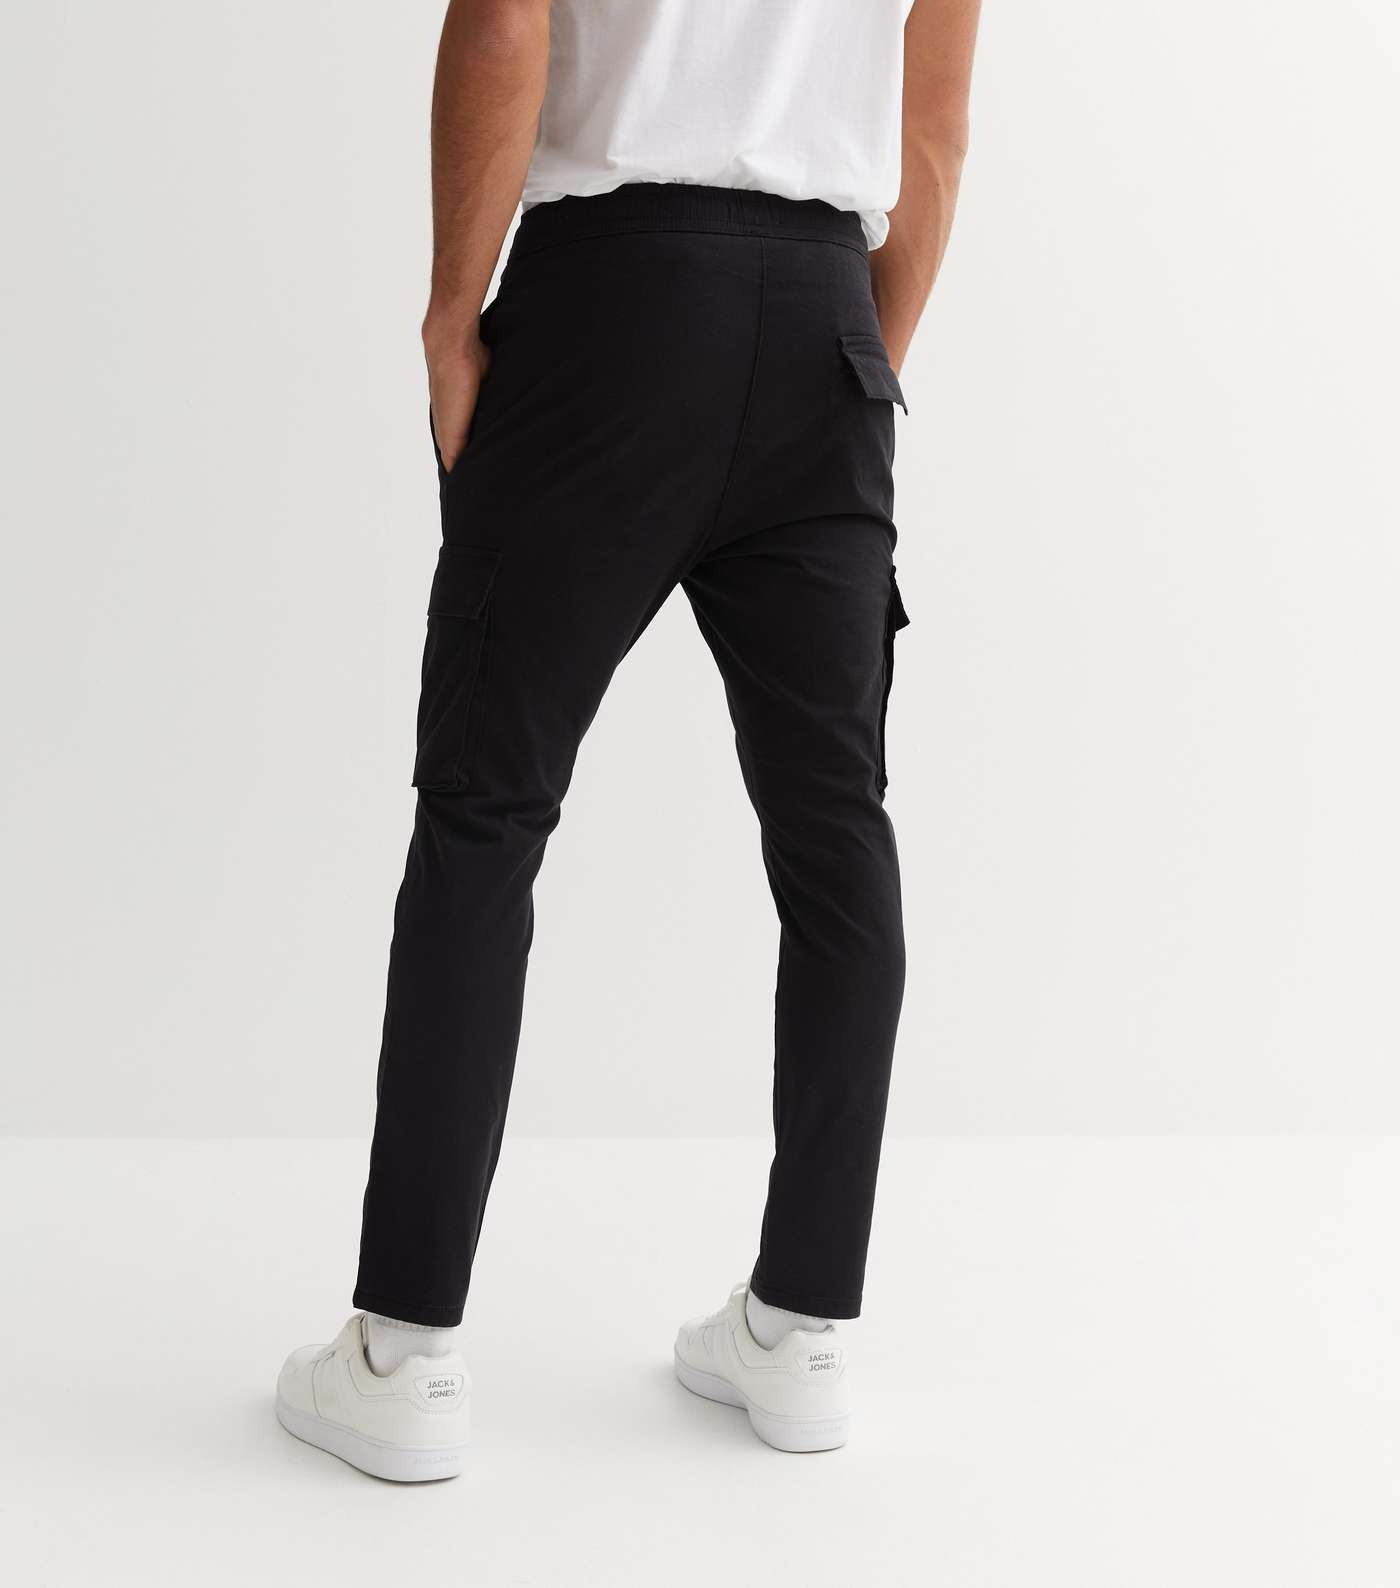 Only & Sons Black Slim Fit Cargo Trousers Image 4